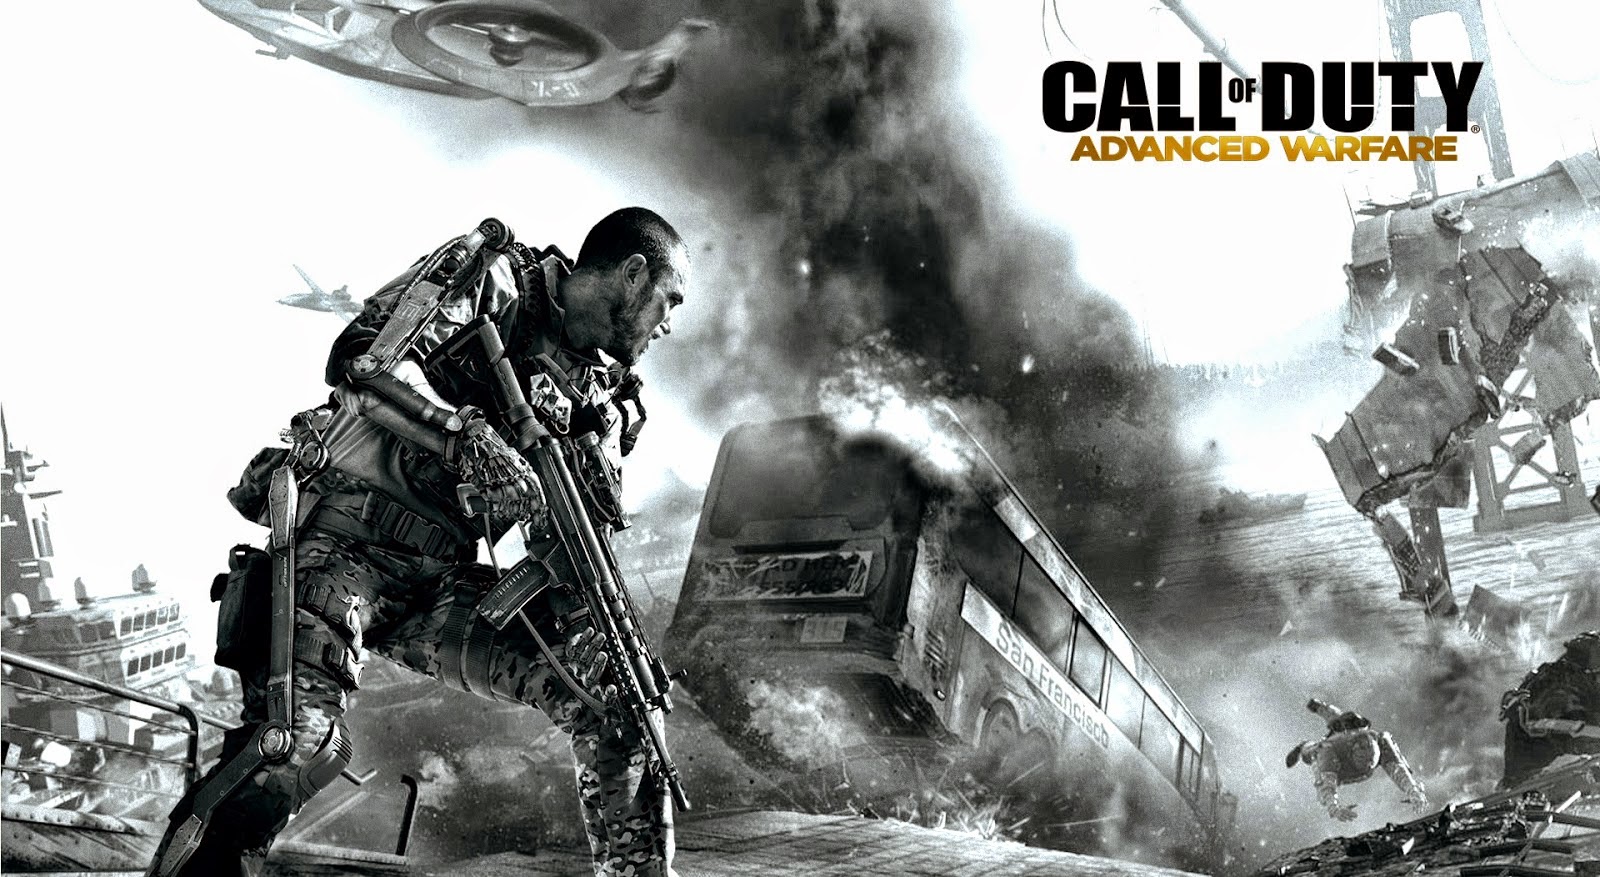 call of duty wallpaper hd,pc game,action adventure game,movie,games